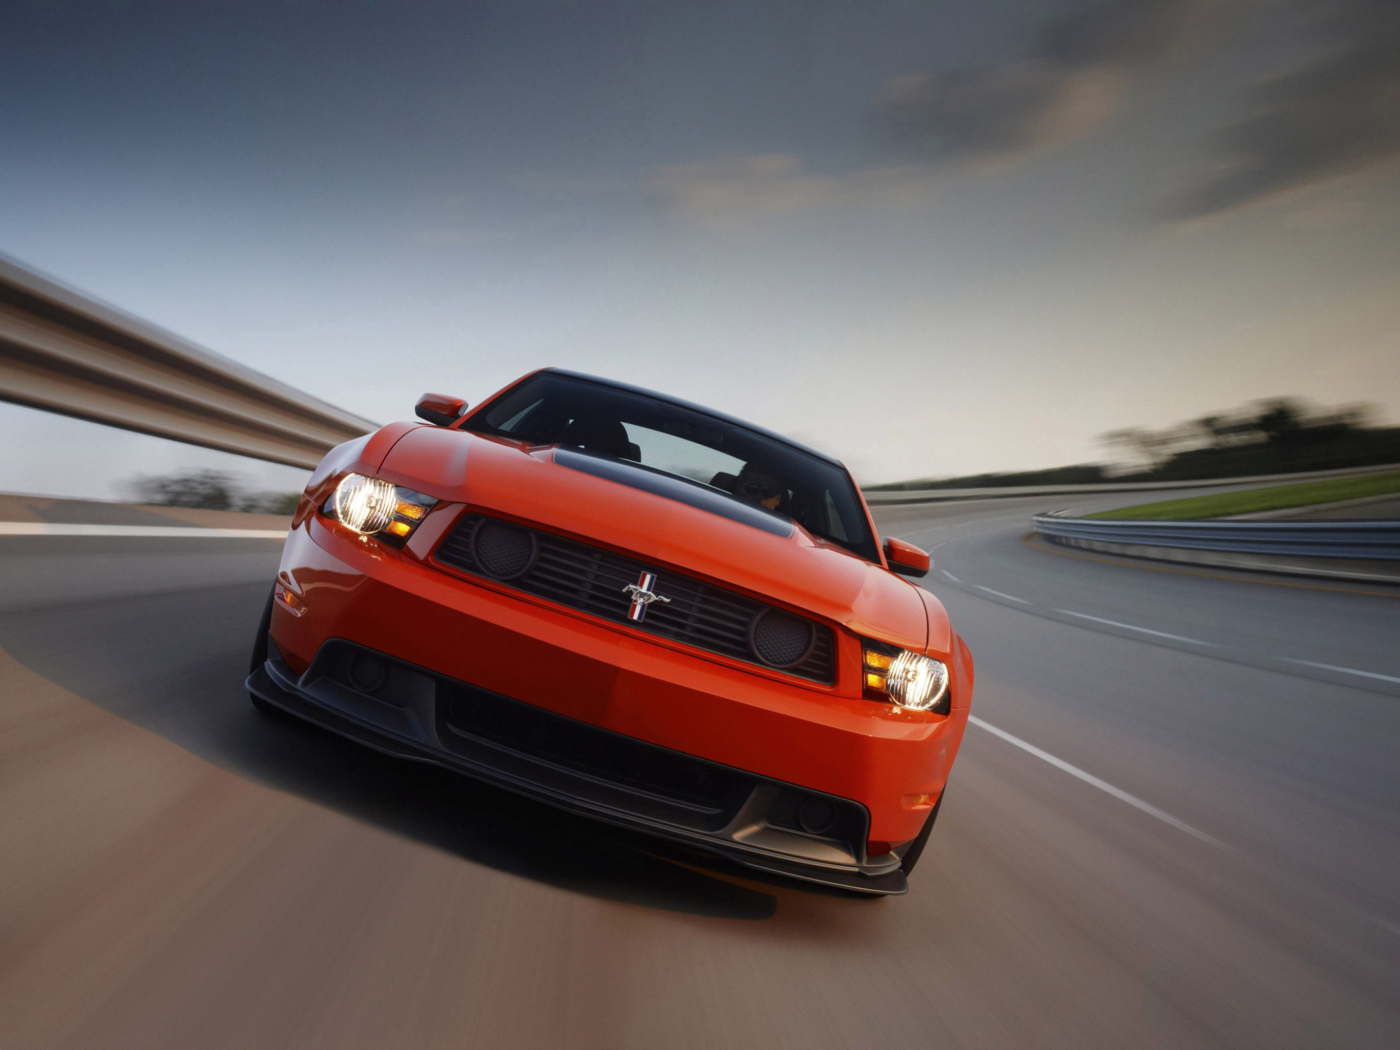 Das Red Cars Ford Mustang Wallpaper 1400x1050